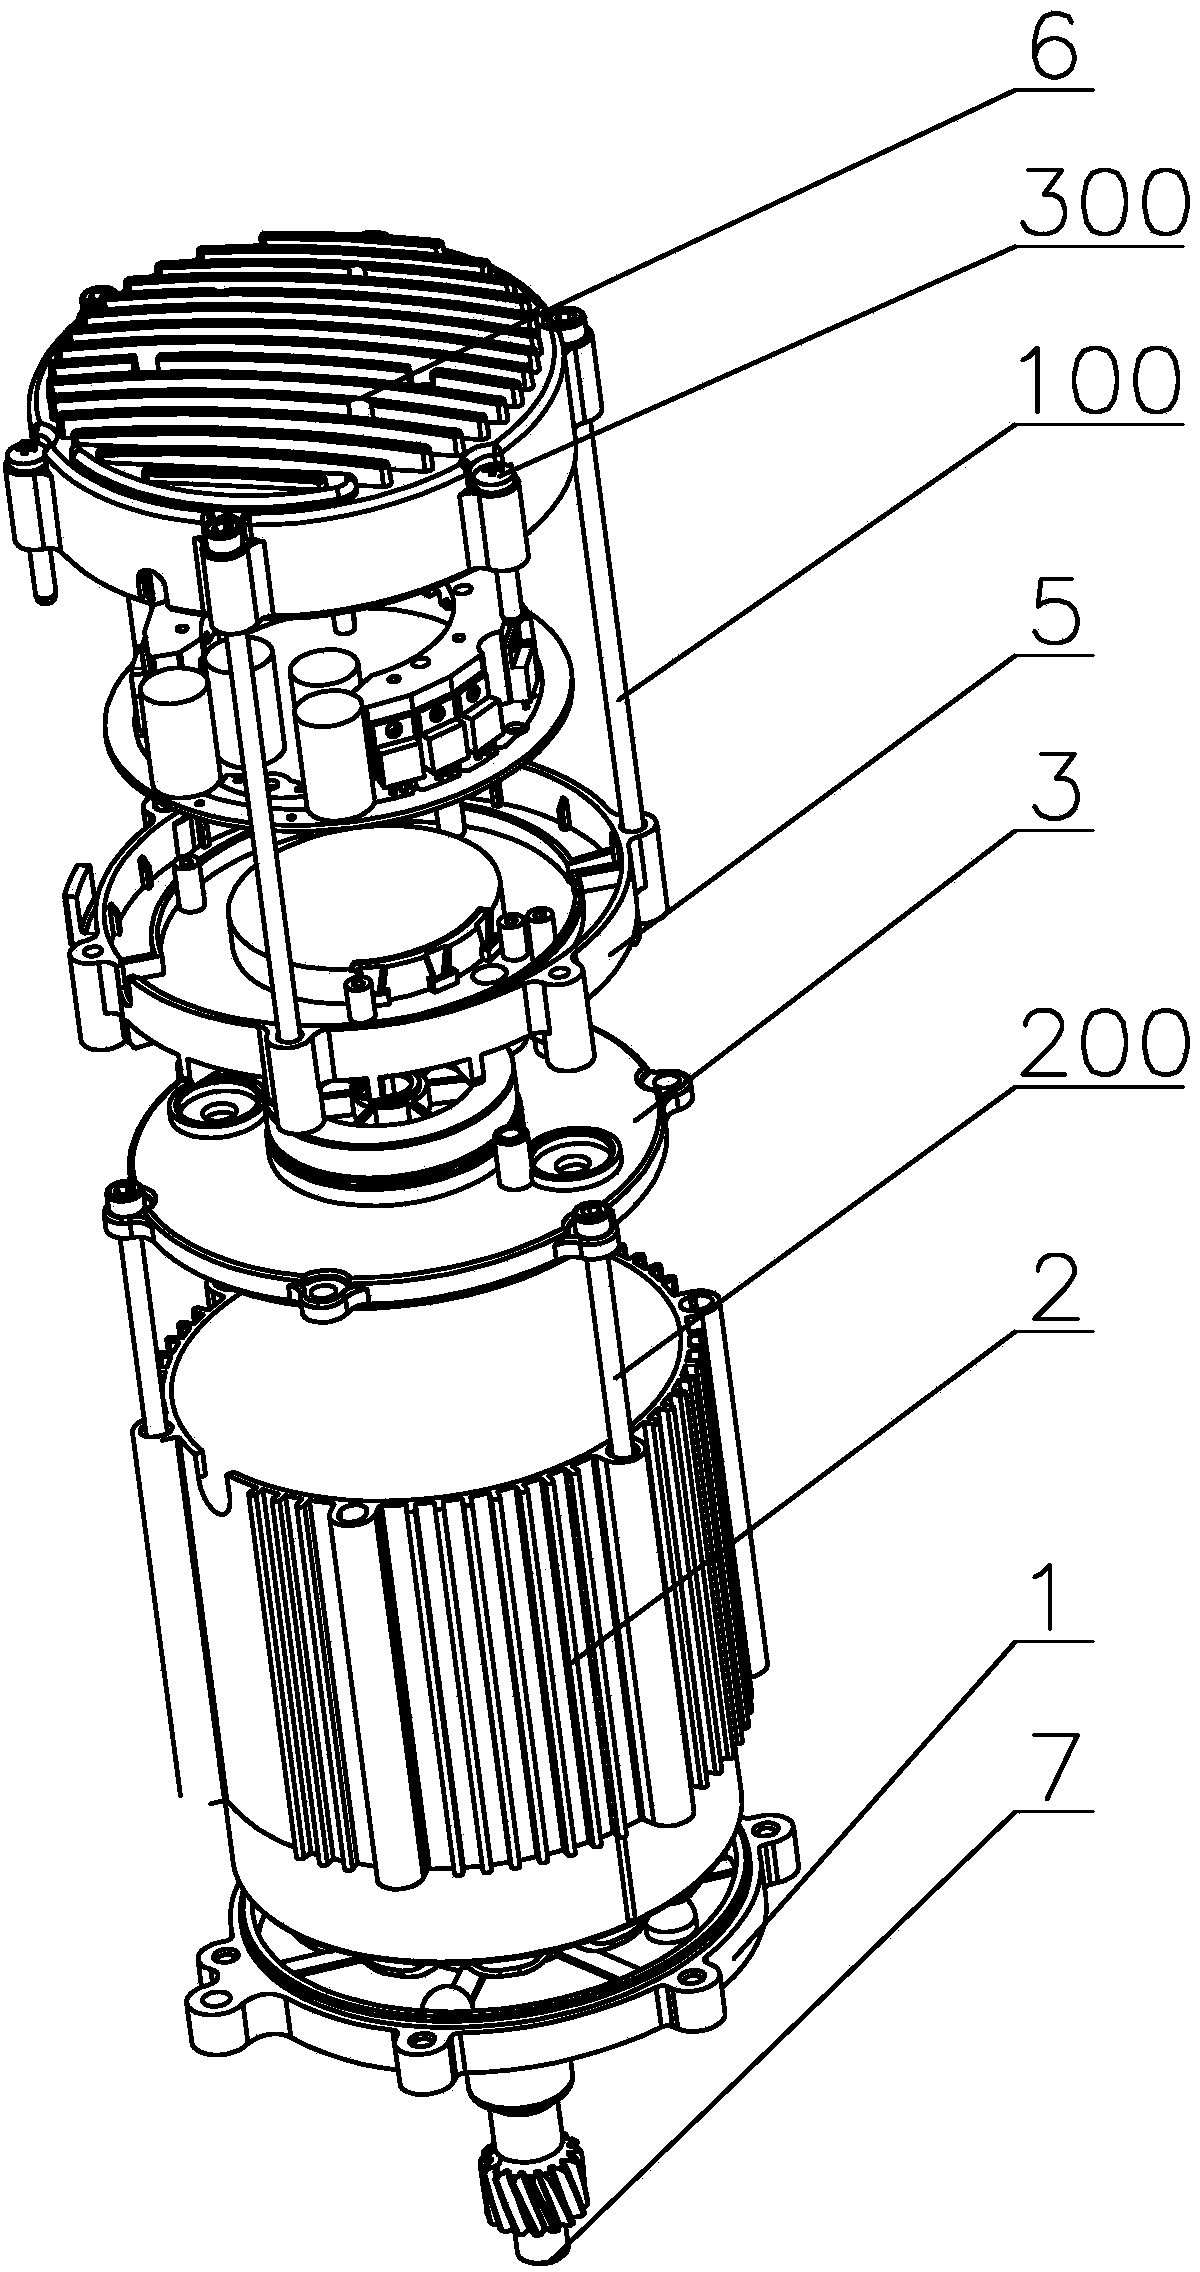 Integrally structured motor and controller assembly